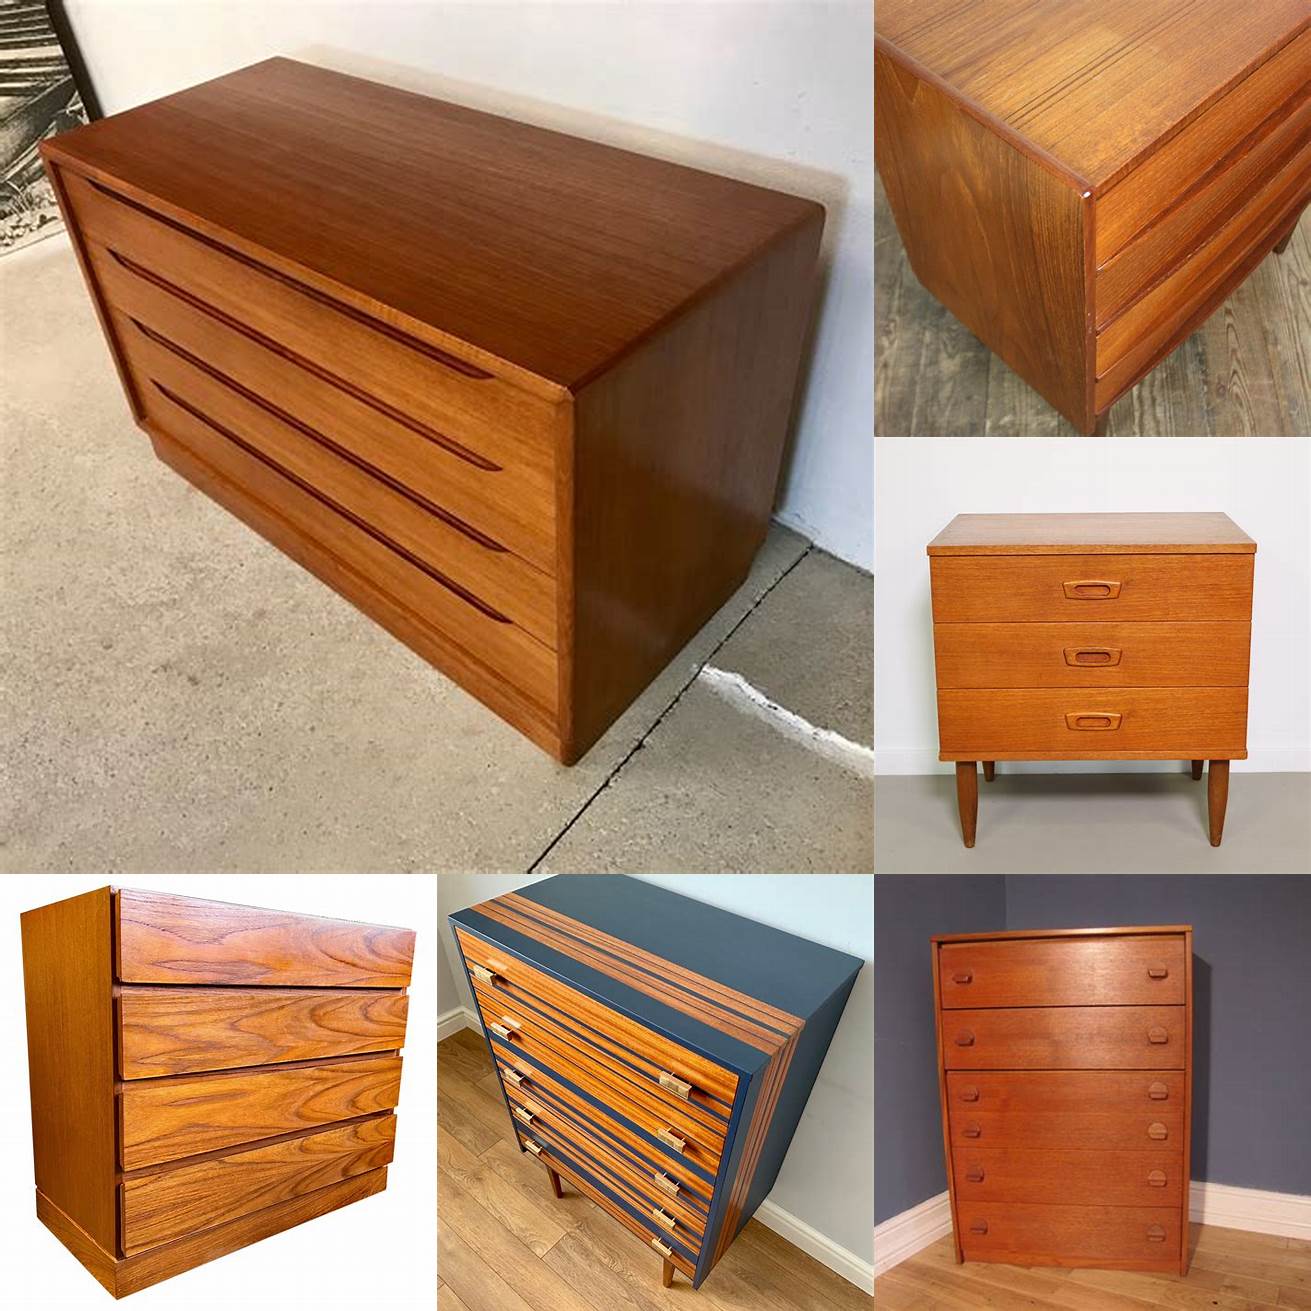 Create a Teak Chest of Drawers